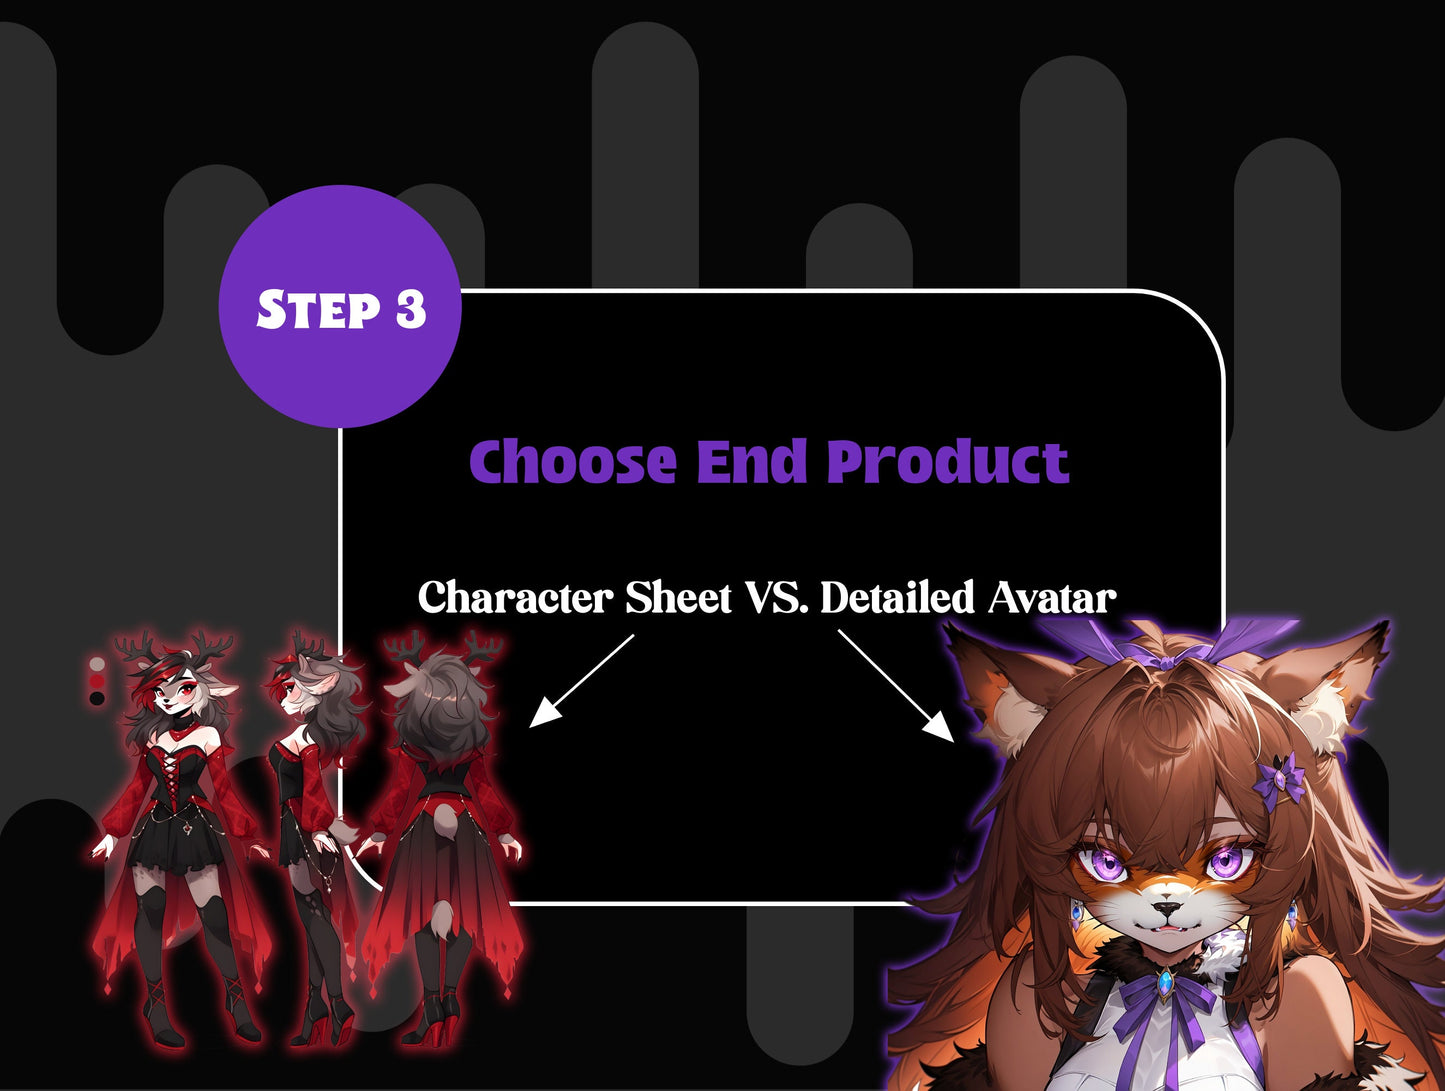 Fursona Adopt Build a Furry: Affordable Character Ref Sheet Commission, Furry Art Detailed Avatar, Customized and Personalized Feral Fursona My Store